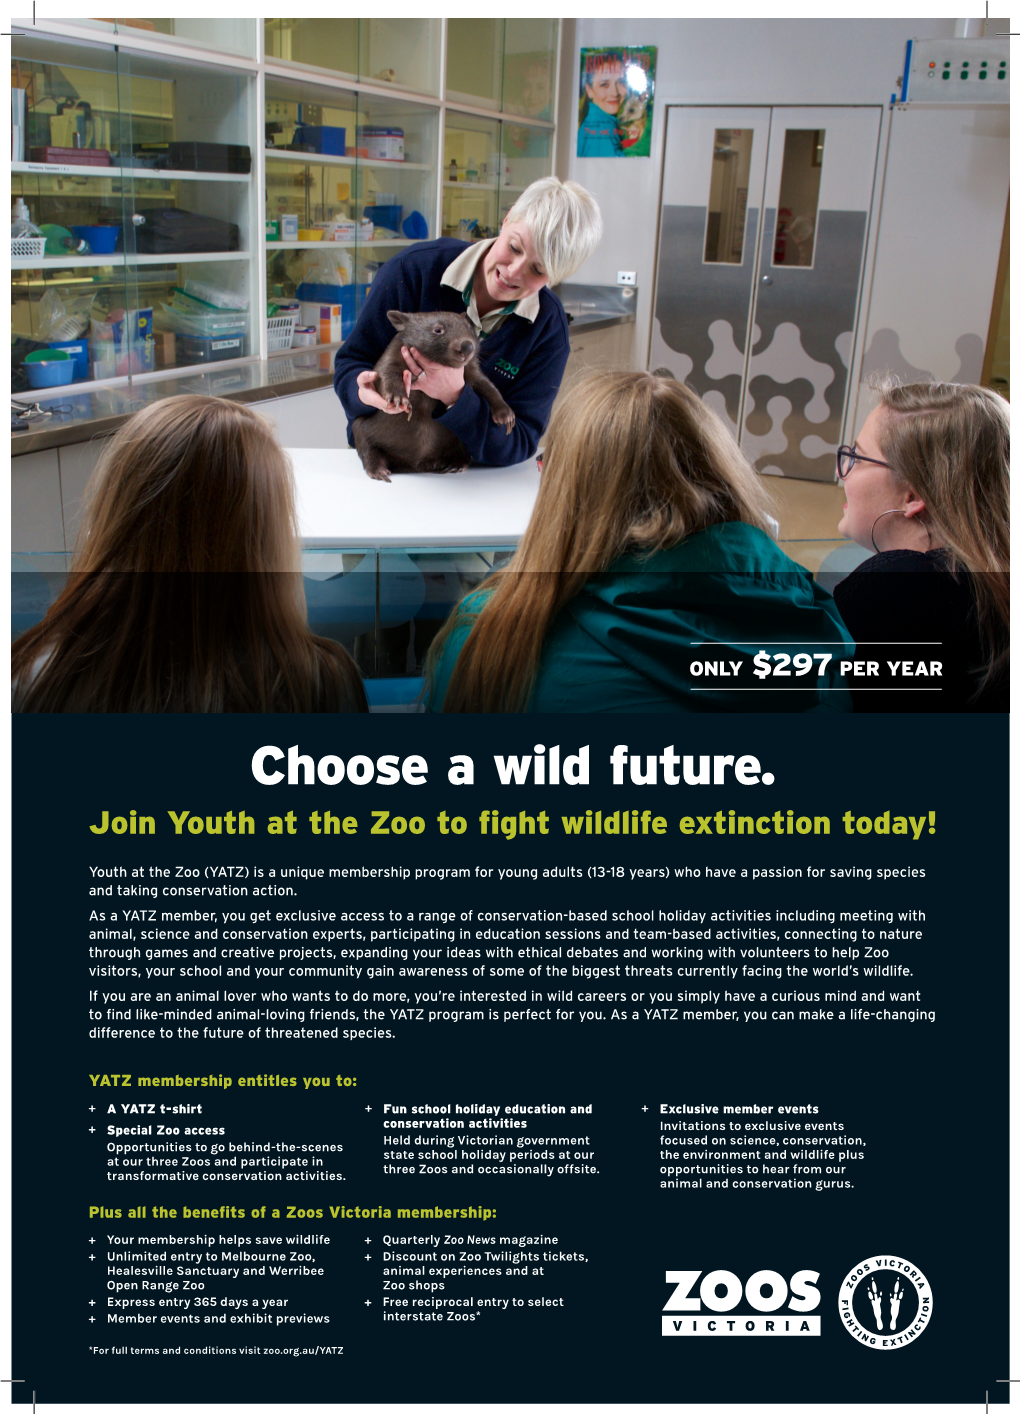 Choose a Wild Future. Join Youth at the Zoo to Fight Wildlife Extinction Today!